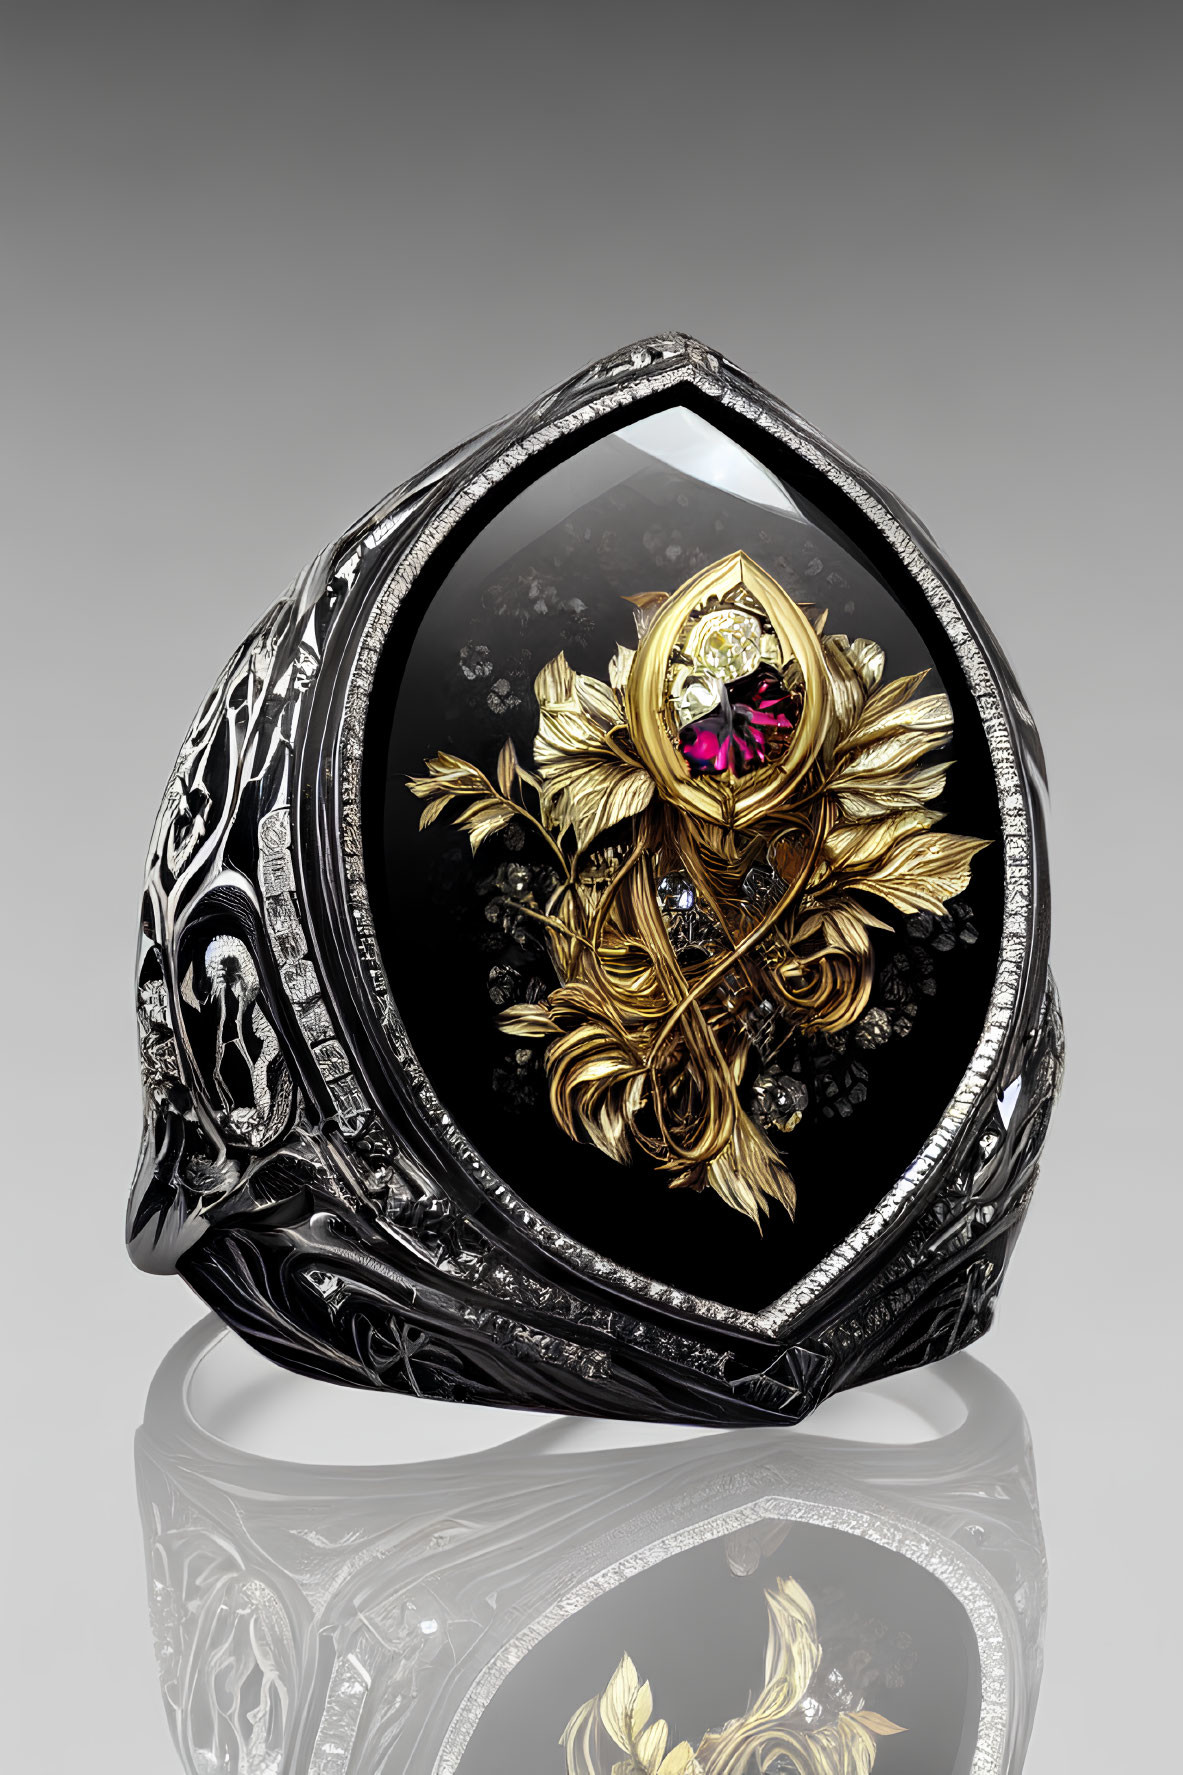 Intricate Black and Gold Ring with Pink Gemstone and Floral Designs